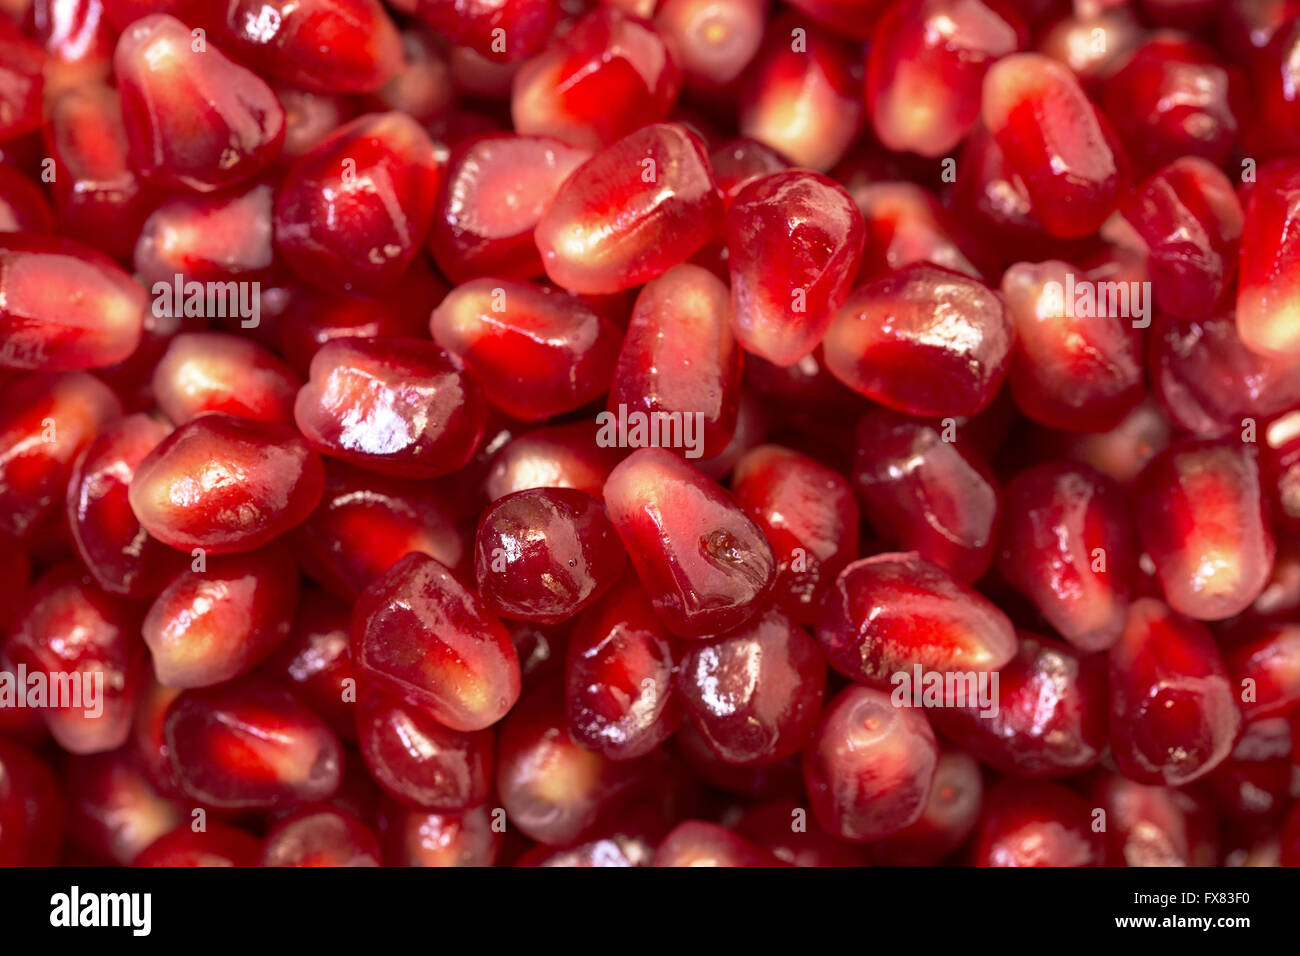 Backdrop from Fresh Pomegranate Seeds, close up Stock Photo